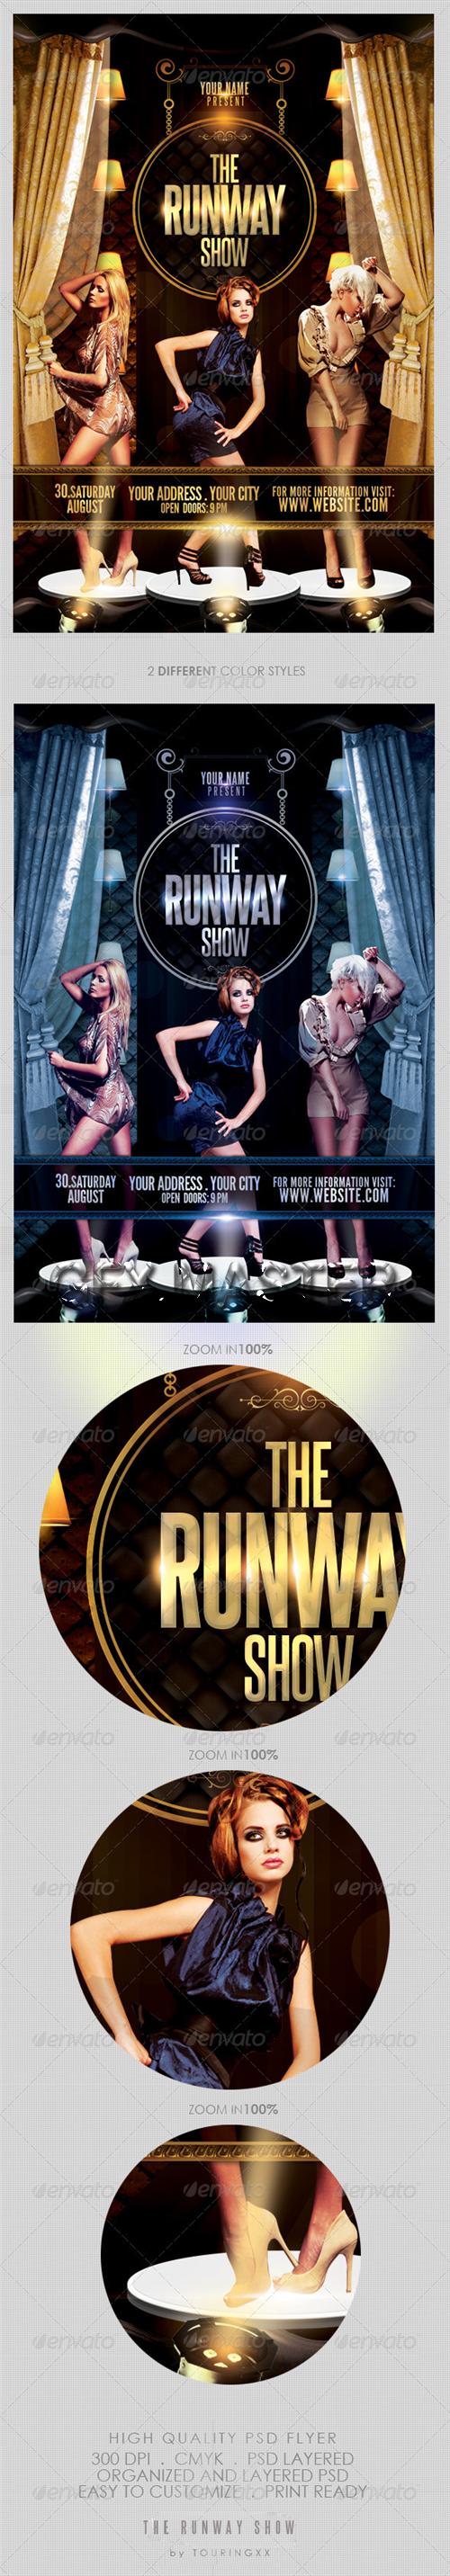 GraphicRiver - The Runway Show Flyer Template